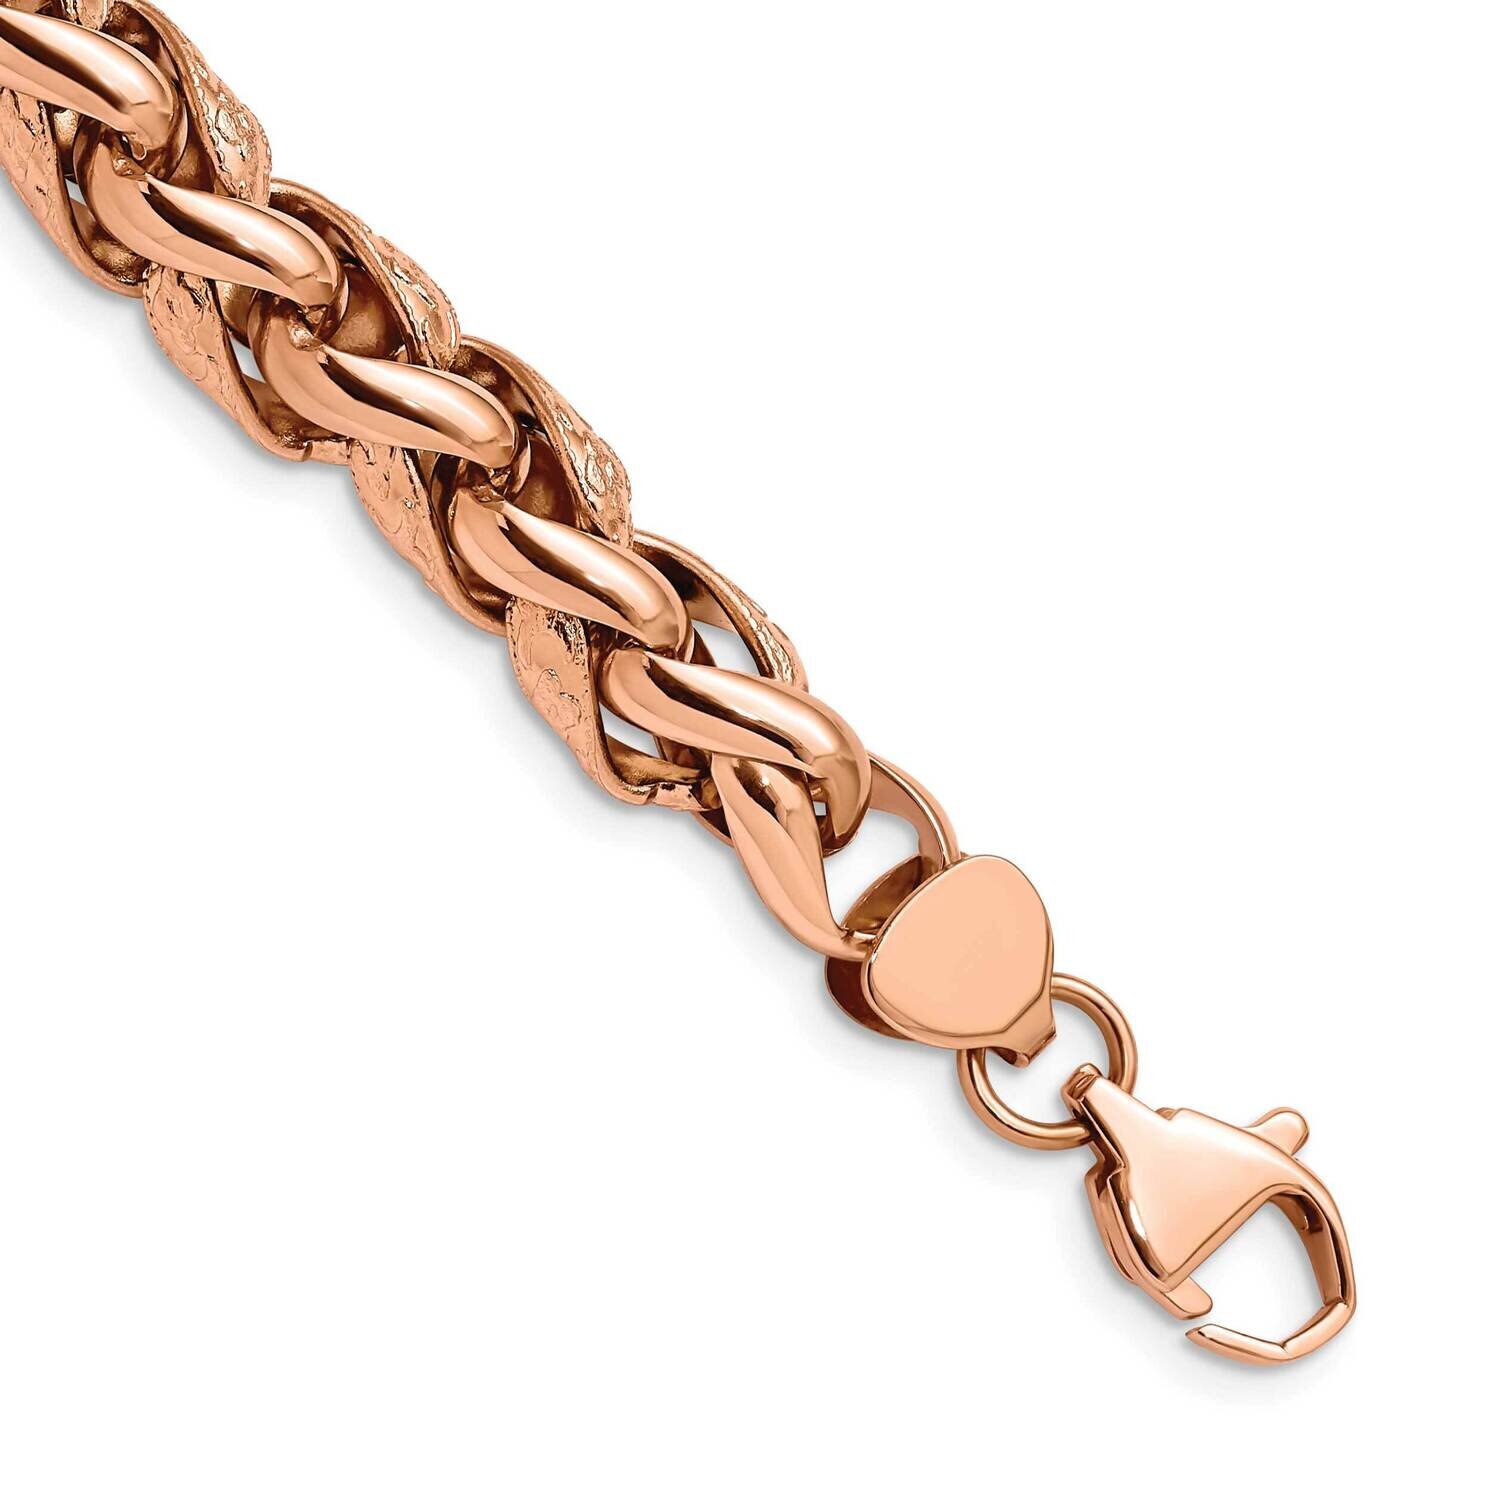 Textured Rose Ip-Plated Wheat 8.75 Inch Bracelet Stainless Steel Polished SRB2773-8.75